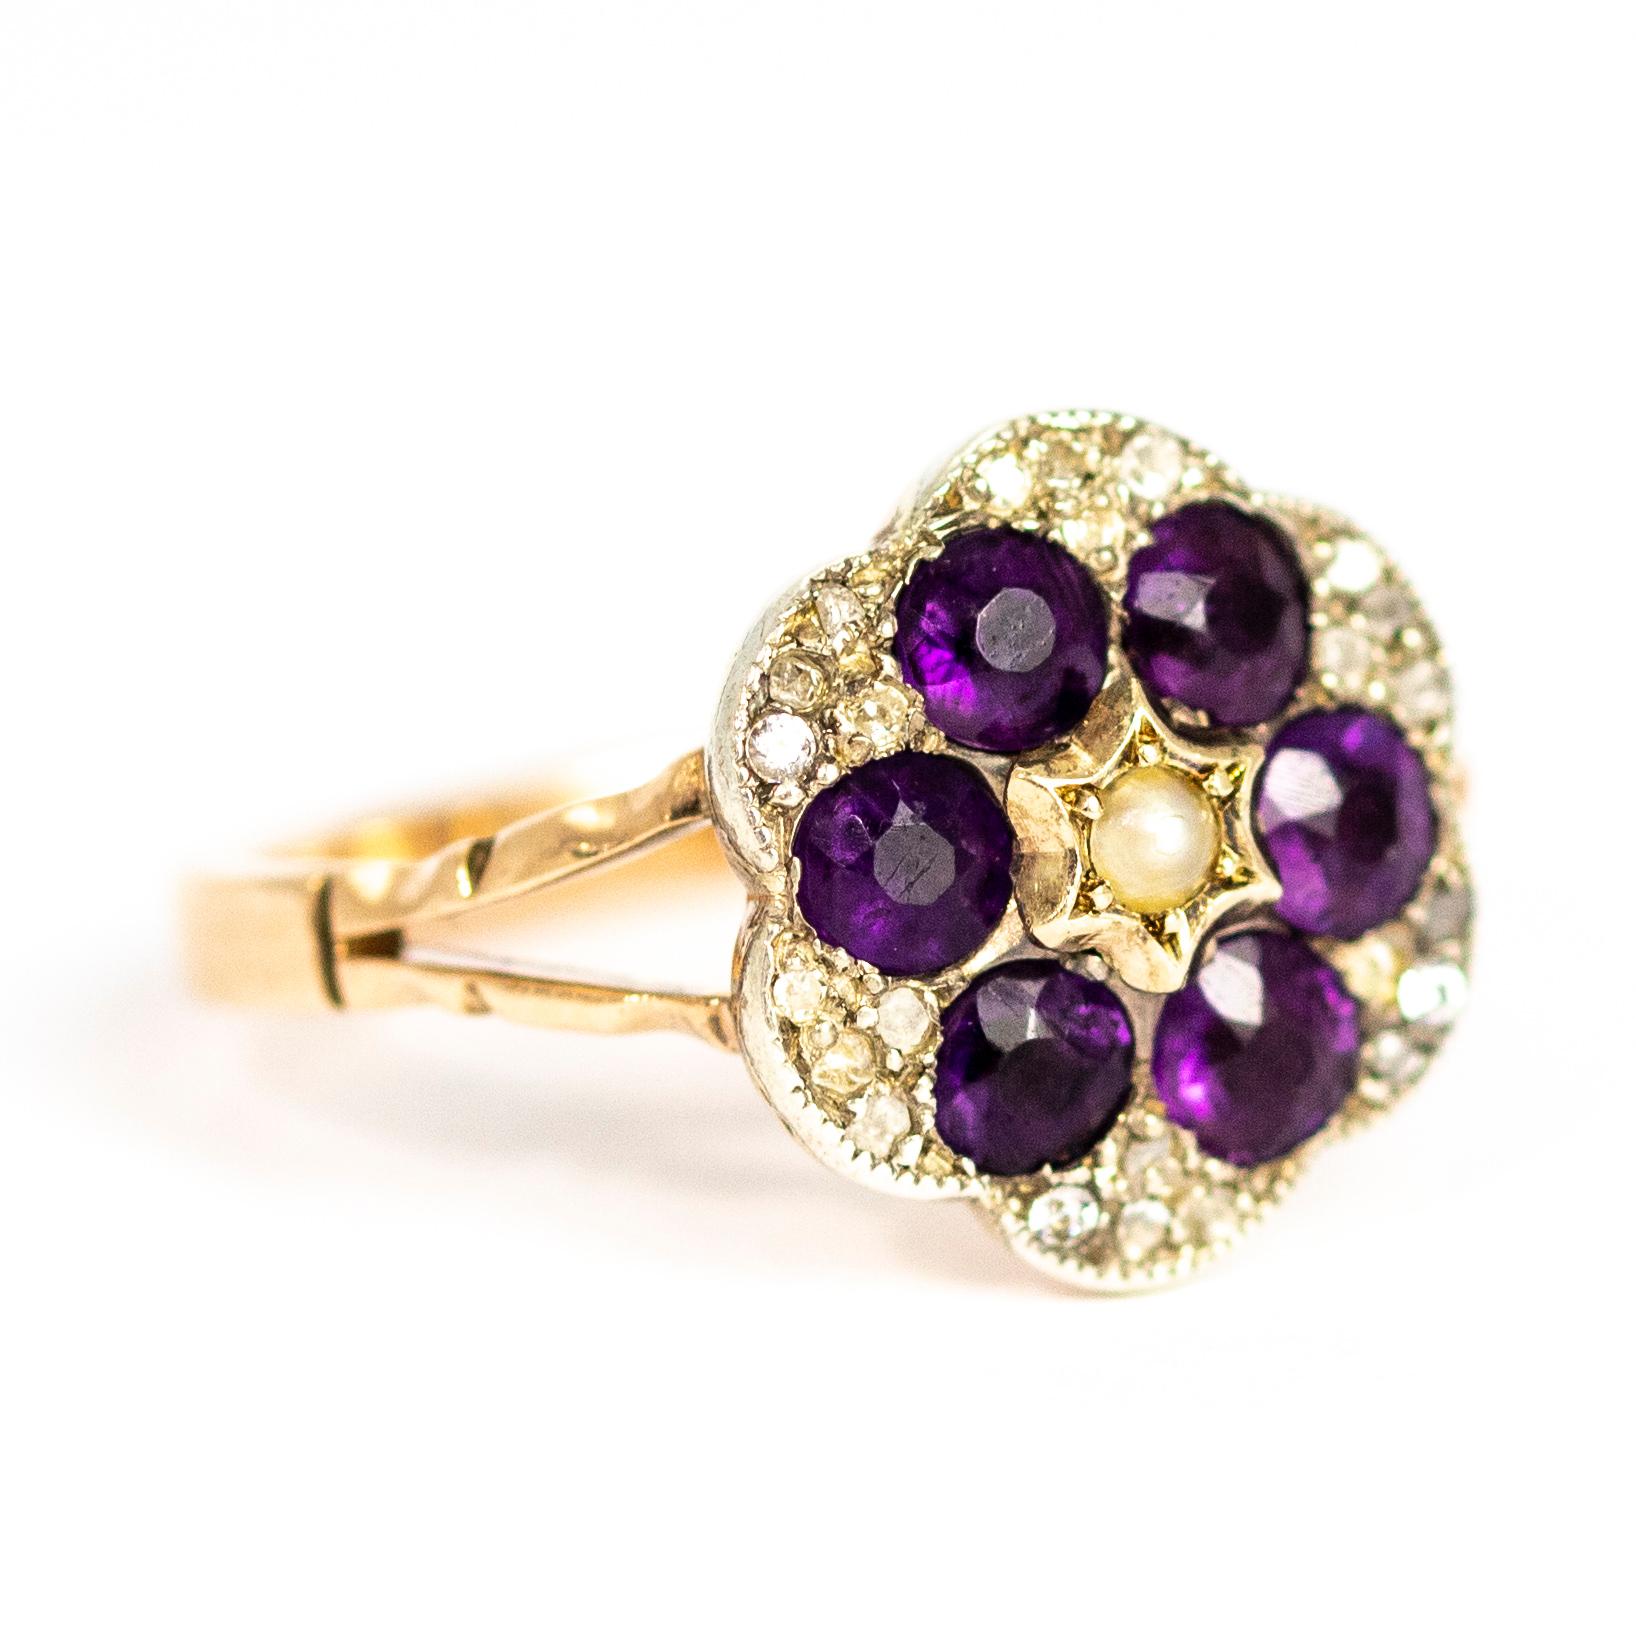 Women's or Men's Victorian 15 Carat Gold Amethyst, Diamond and Pearl Cluster Ring